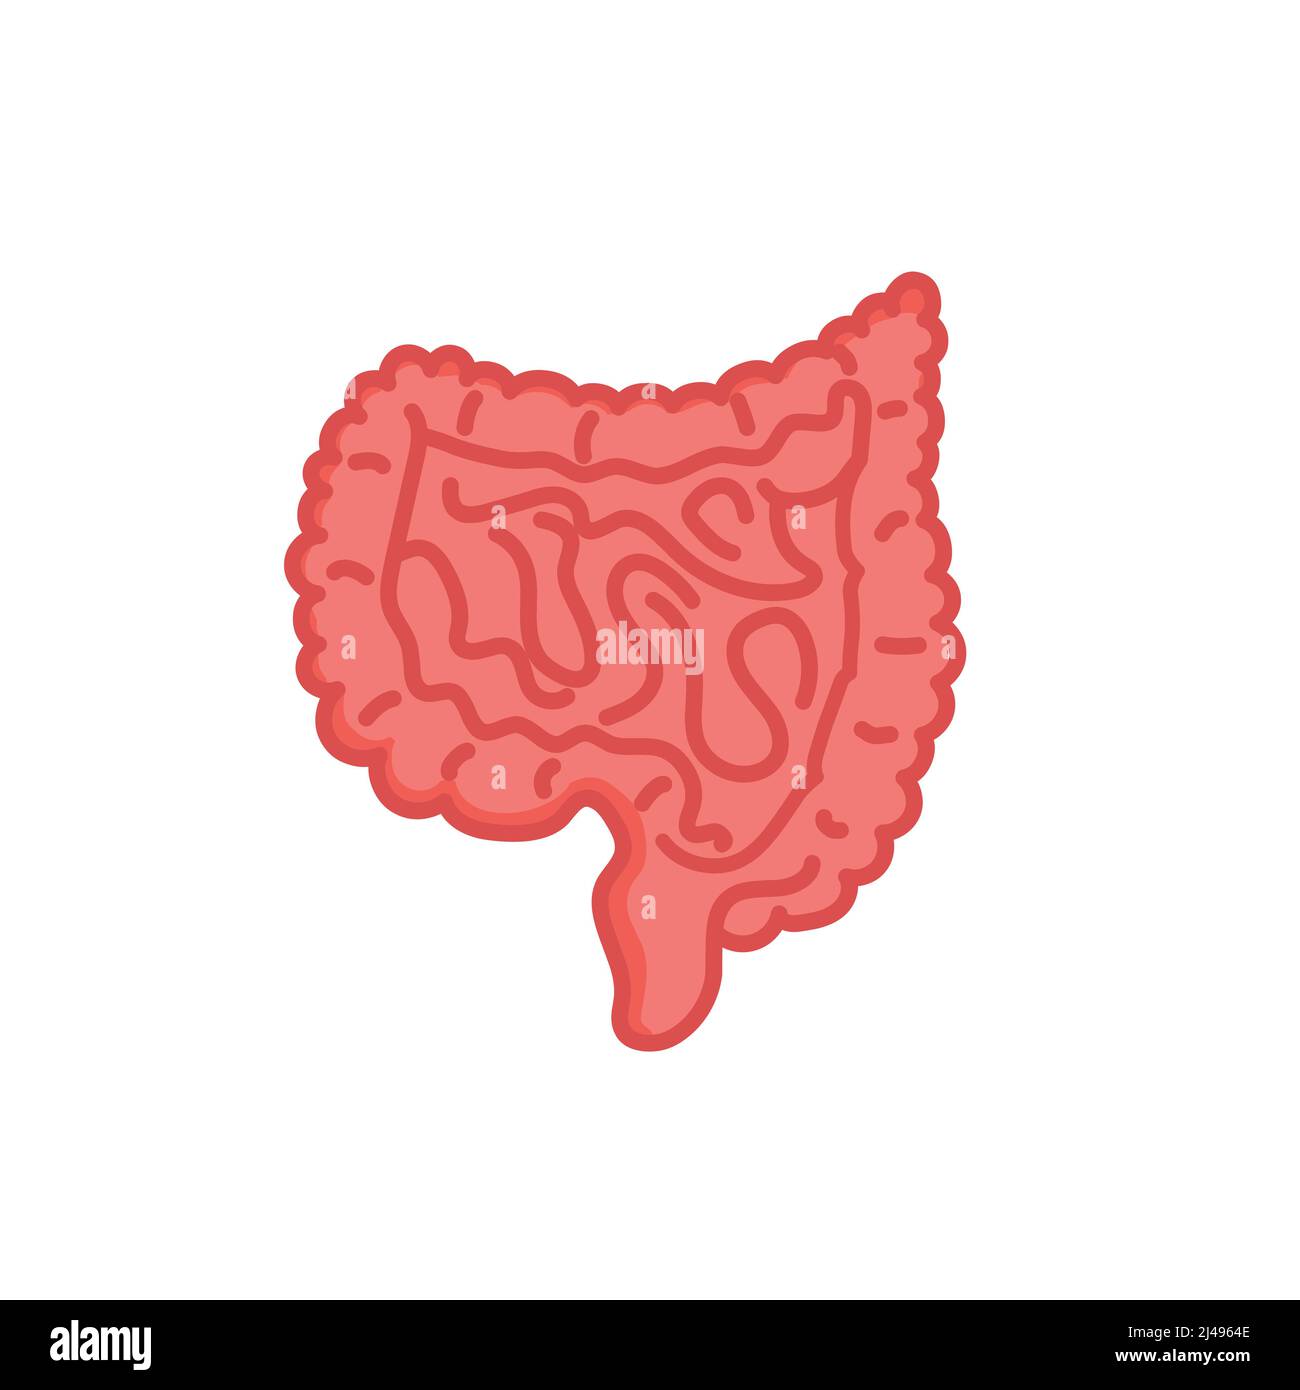 Human intestines illustration isolated on white background Stock Vector